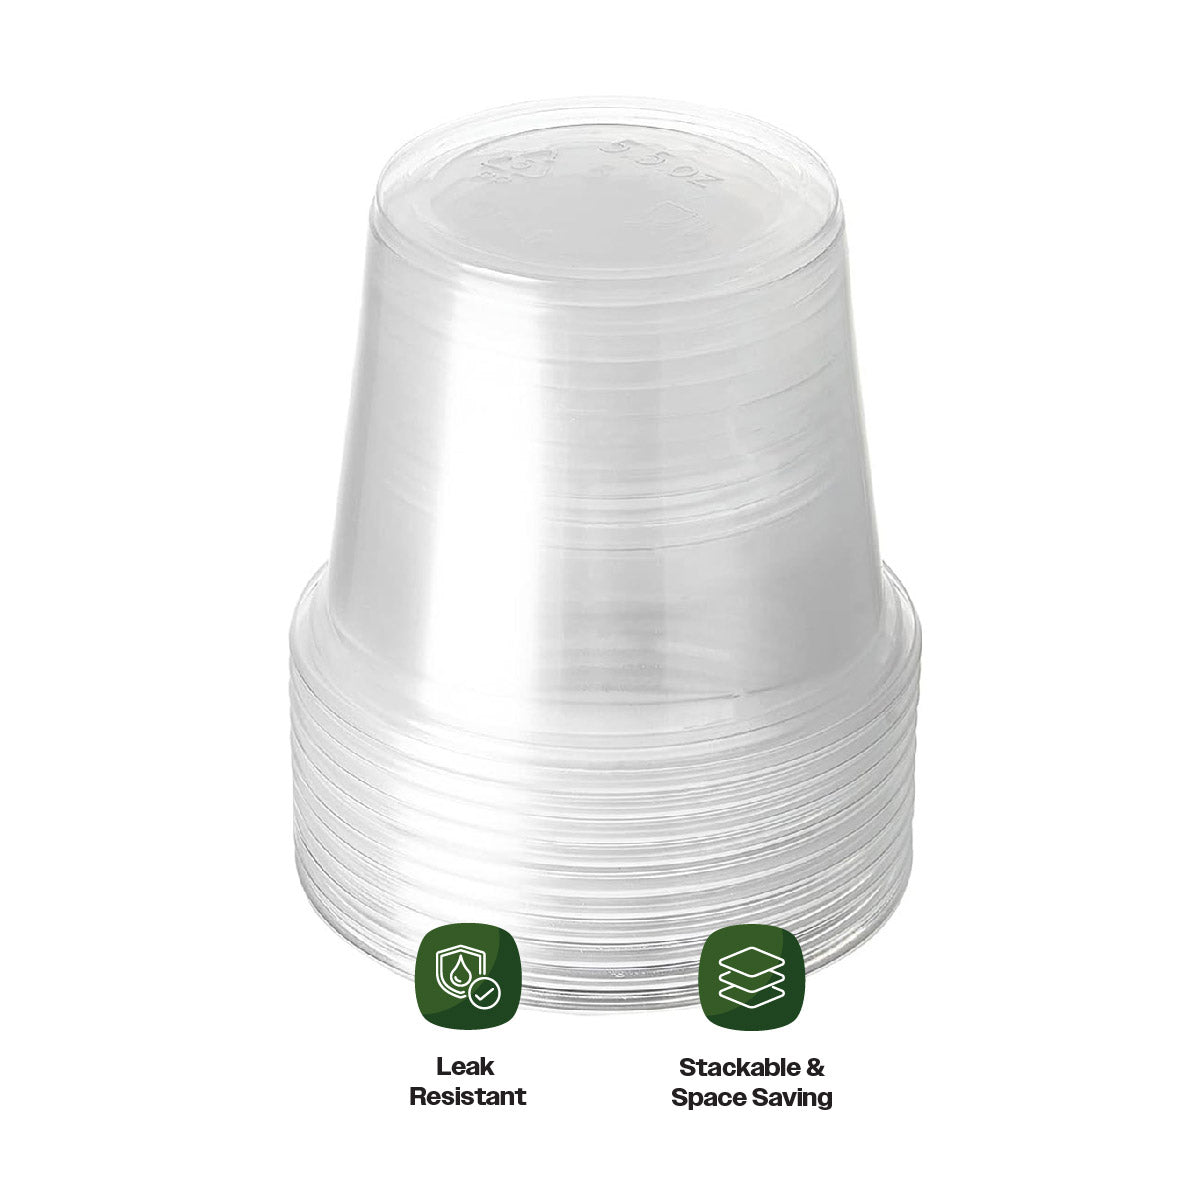 CIAO! 5.5OZ PP Clear Portion Cup (Case of 2,500)